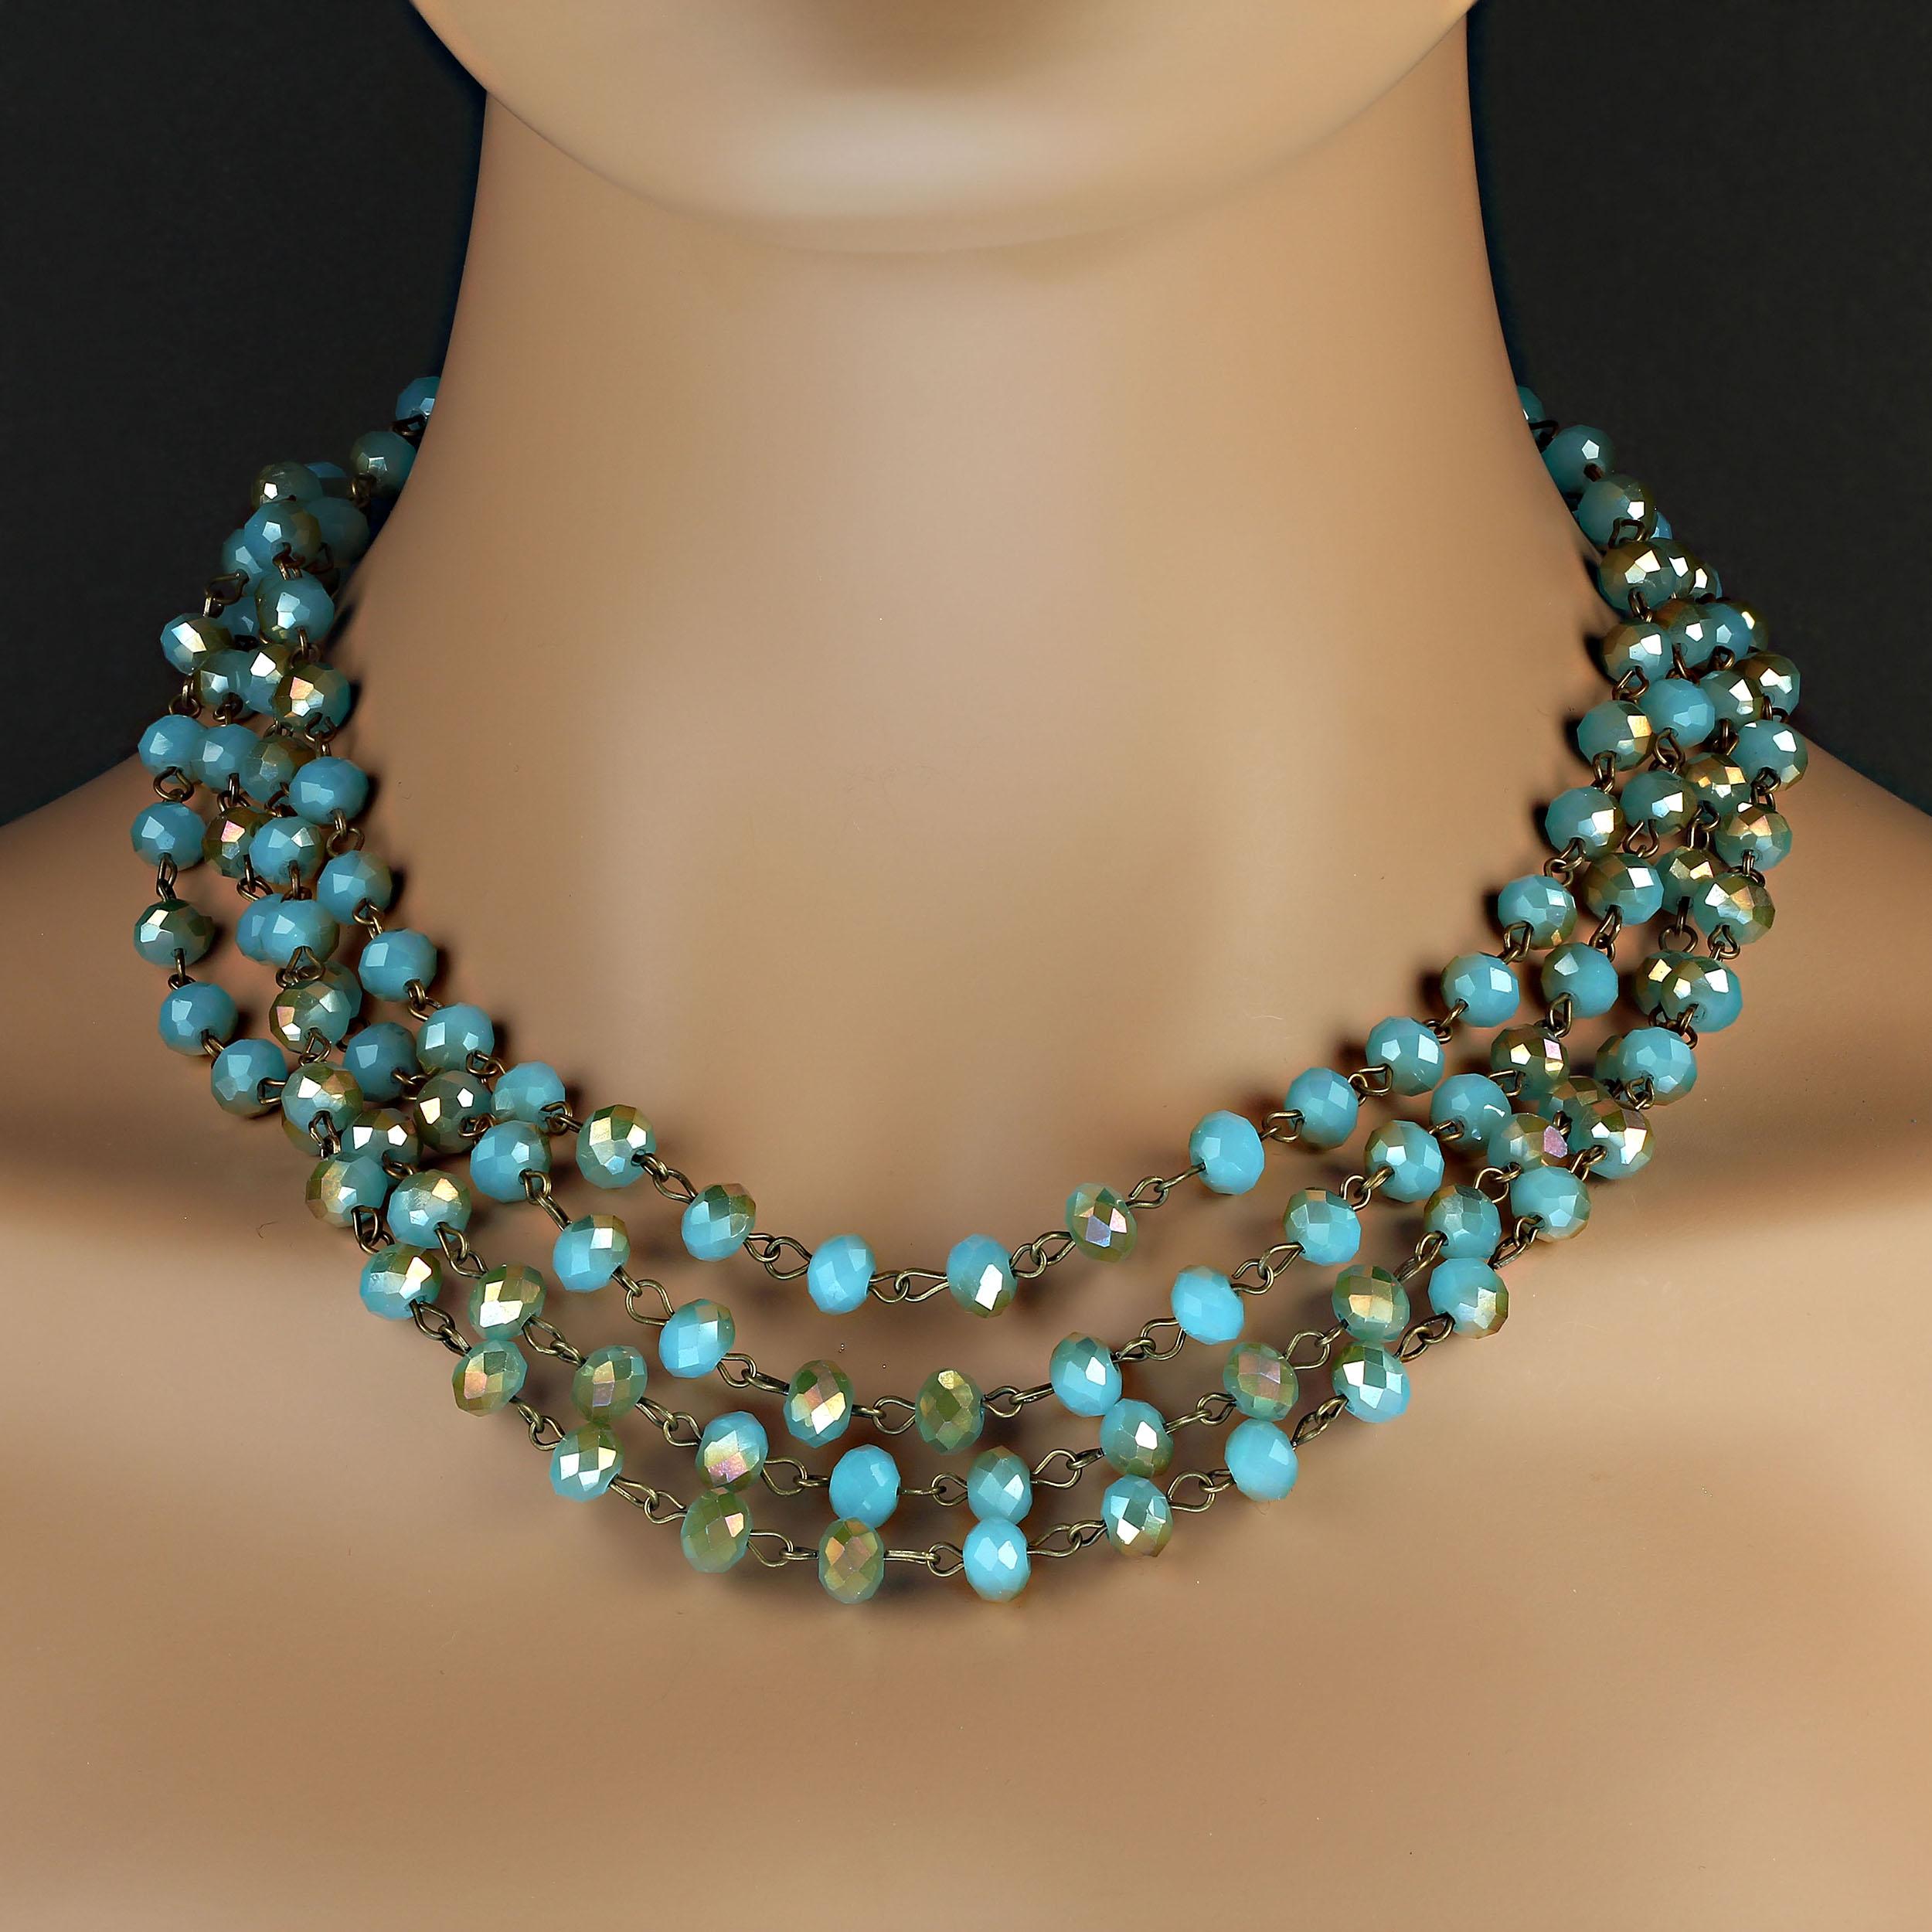 Custom made 80 inch teal crystal bead necklace.  These are lovely 'AB' crystals which means that they flash bronzy gold over the teal as they turn. As a long 80 inch length this is very versatile.  This unique necklace can be worn as one very long